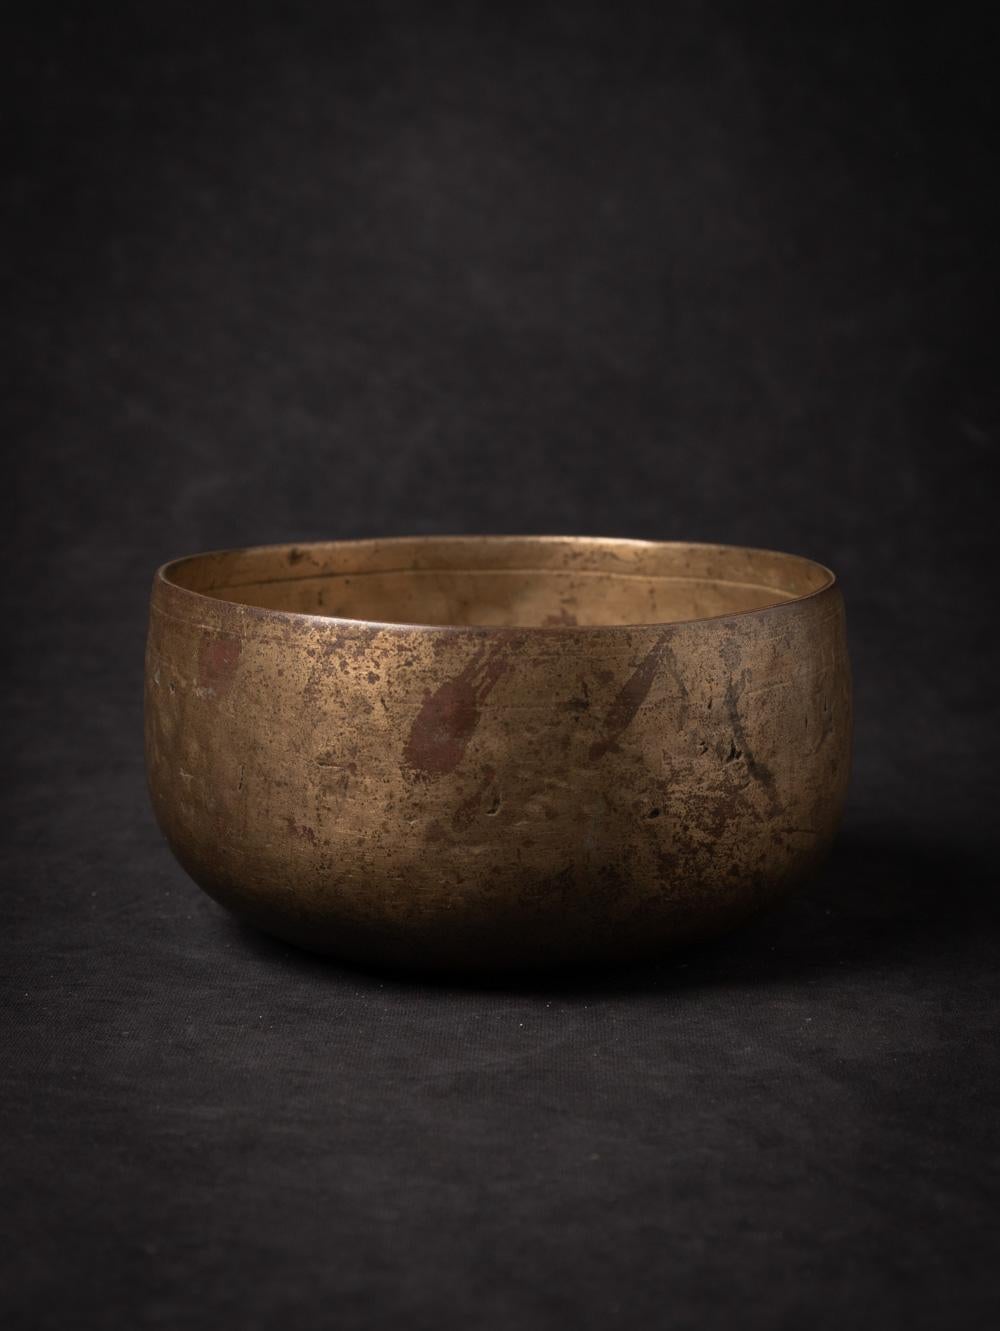 This antique bronze Nepali Singing bowl originates from Nepal and dates back to the 19th century. Crafted from bronze, it showcases the rich cultural heritage of Nepal. The bowl stands at a height of 9 cm with a diameter of 16,9 cm, making it a